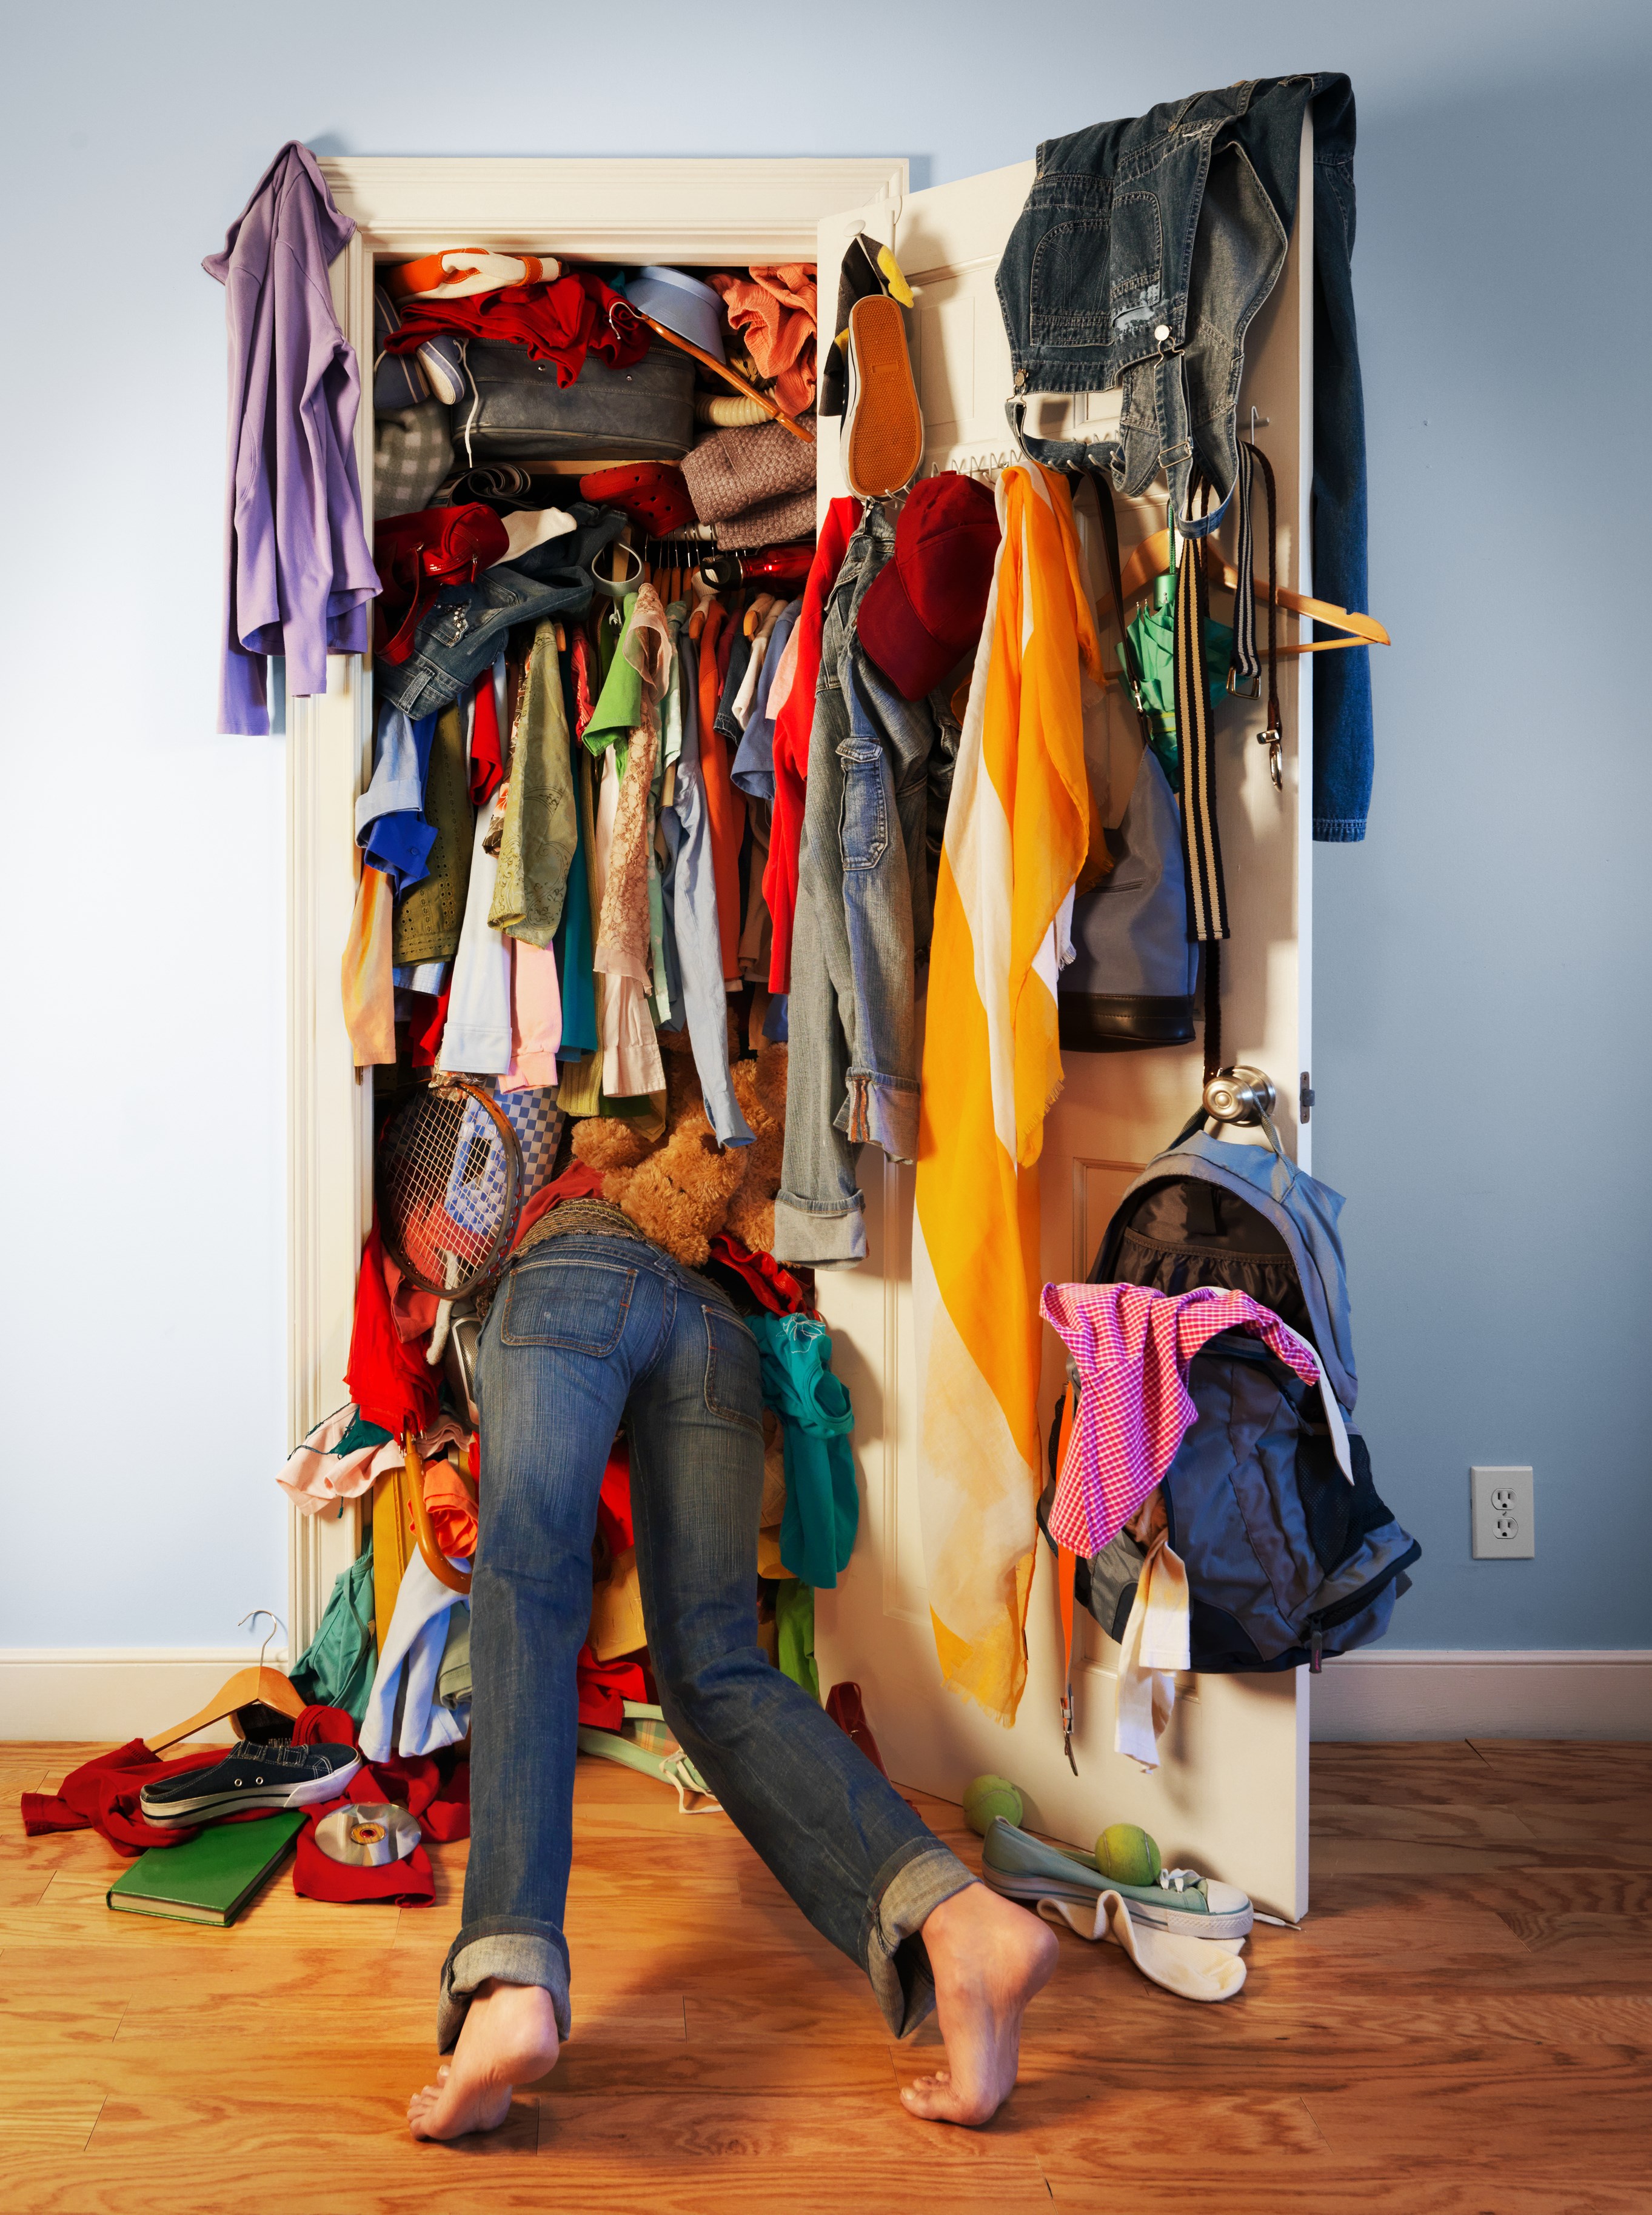 BISSELL Rental's quick three-step approach to cleaning out closet clutter will help you reclaim this valuable space and keep it organized.